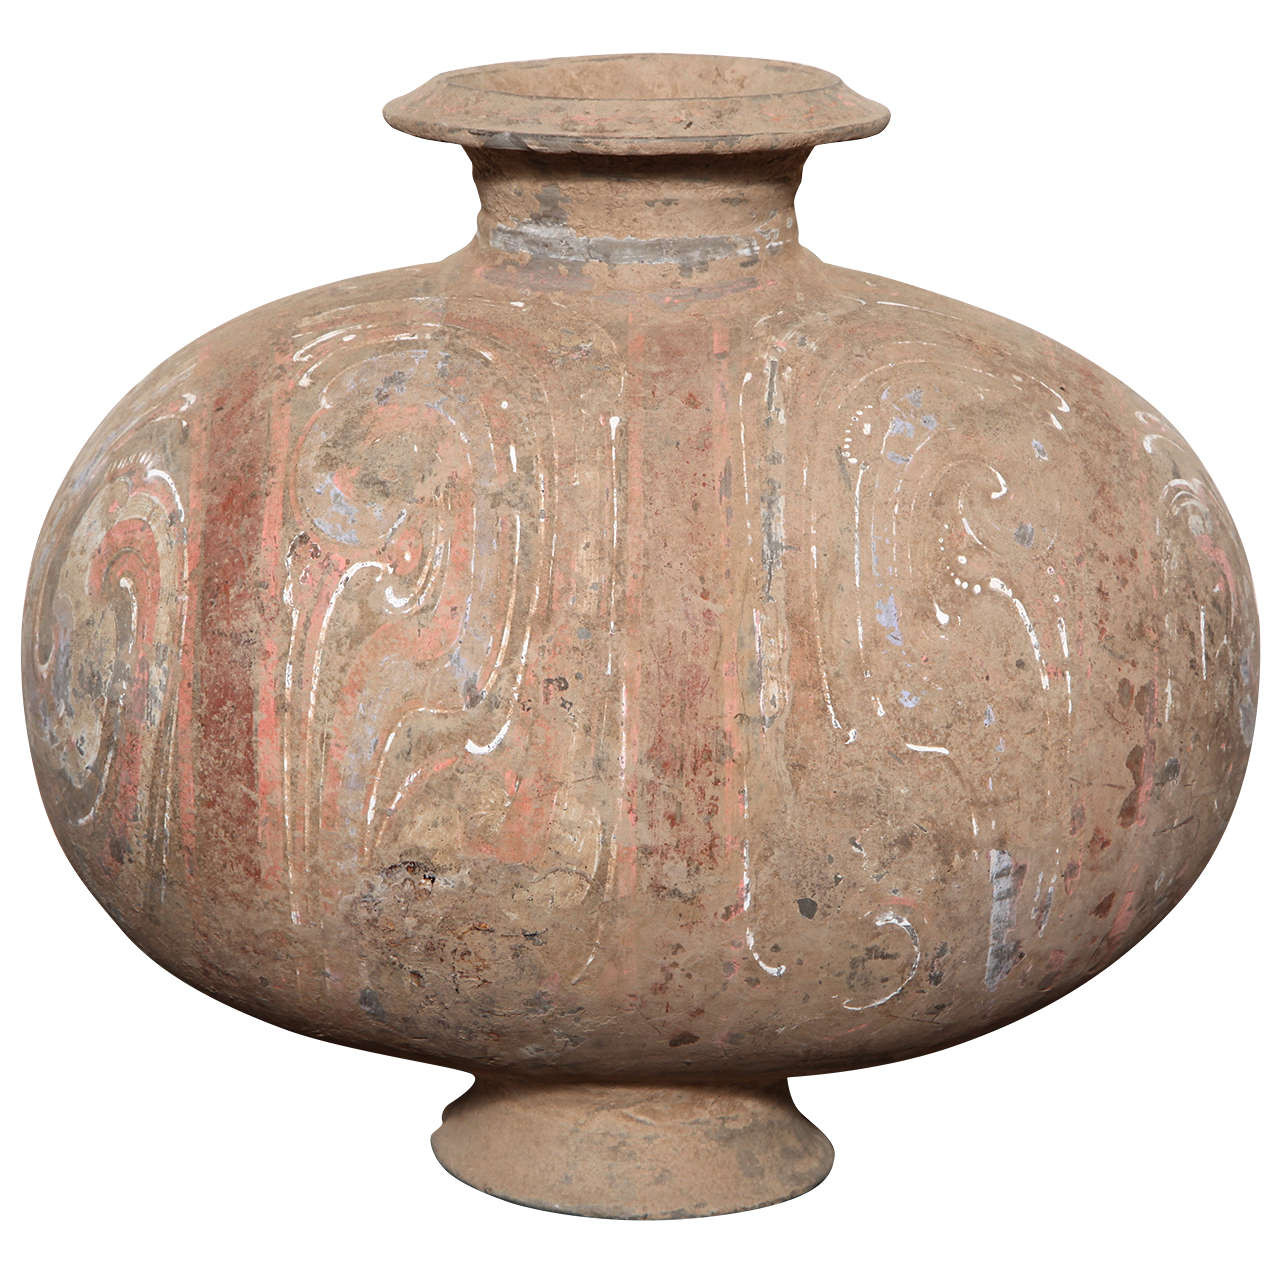 10 Unique Han Dynasty Vase Value 2024 free download han dynasty vase value of 206 bc 200 ad han dynasty antique terracotta silk cocoon jar with inside 206 bc 200 ad han dynasty antique terracotta silk cocoon jar with original paint for